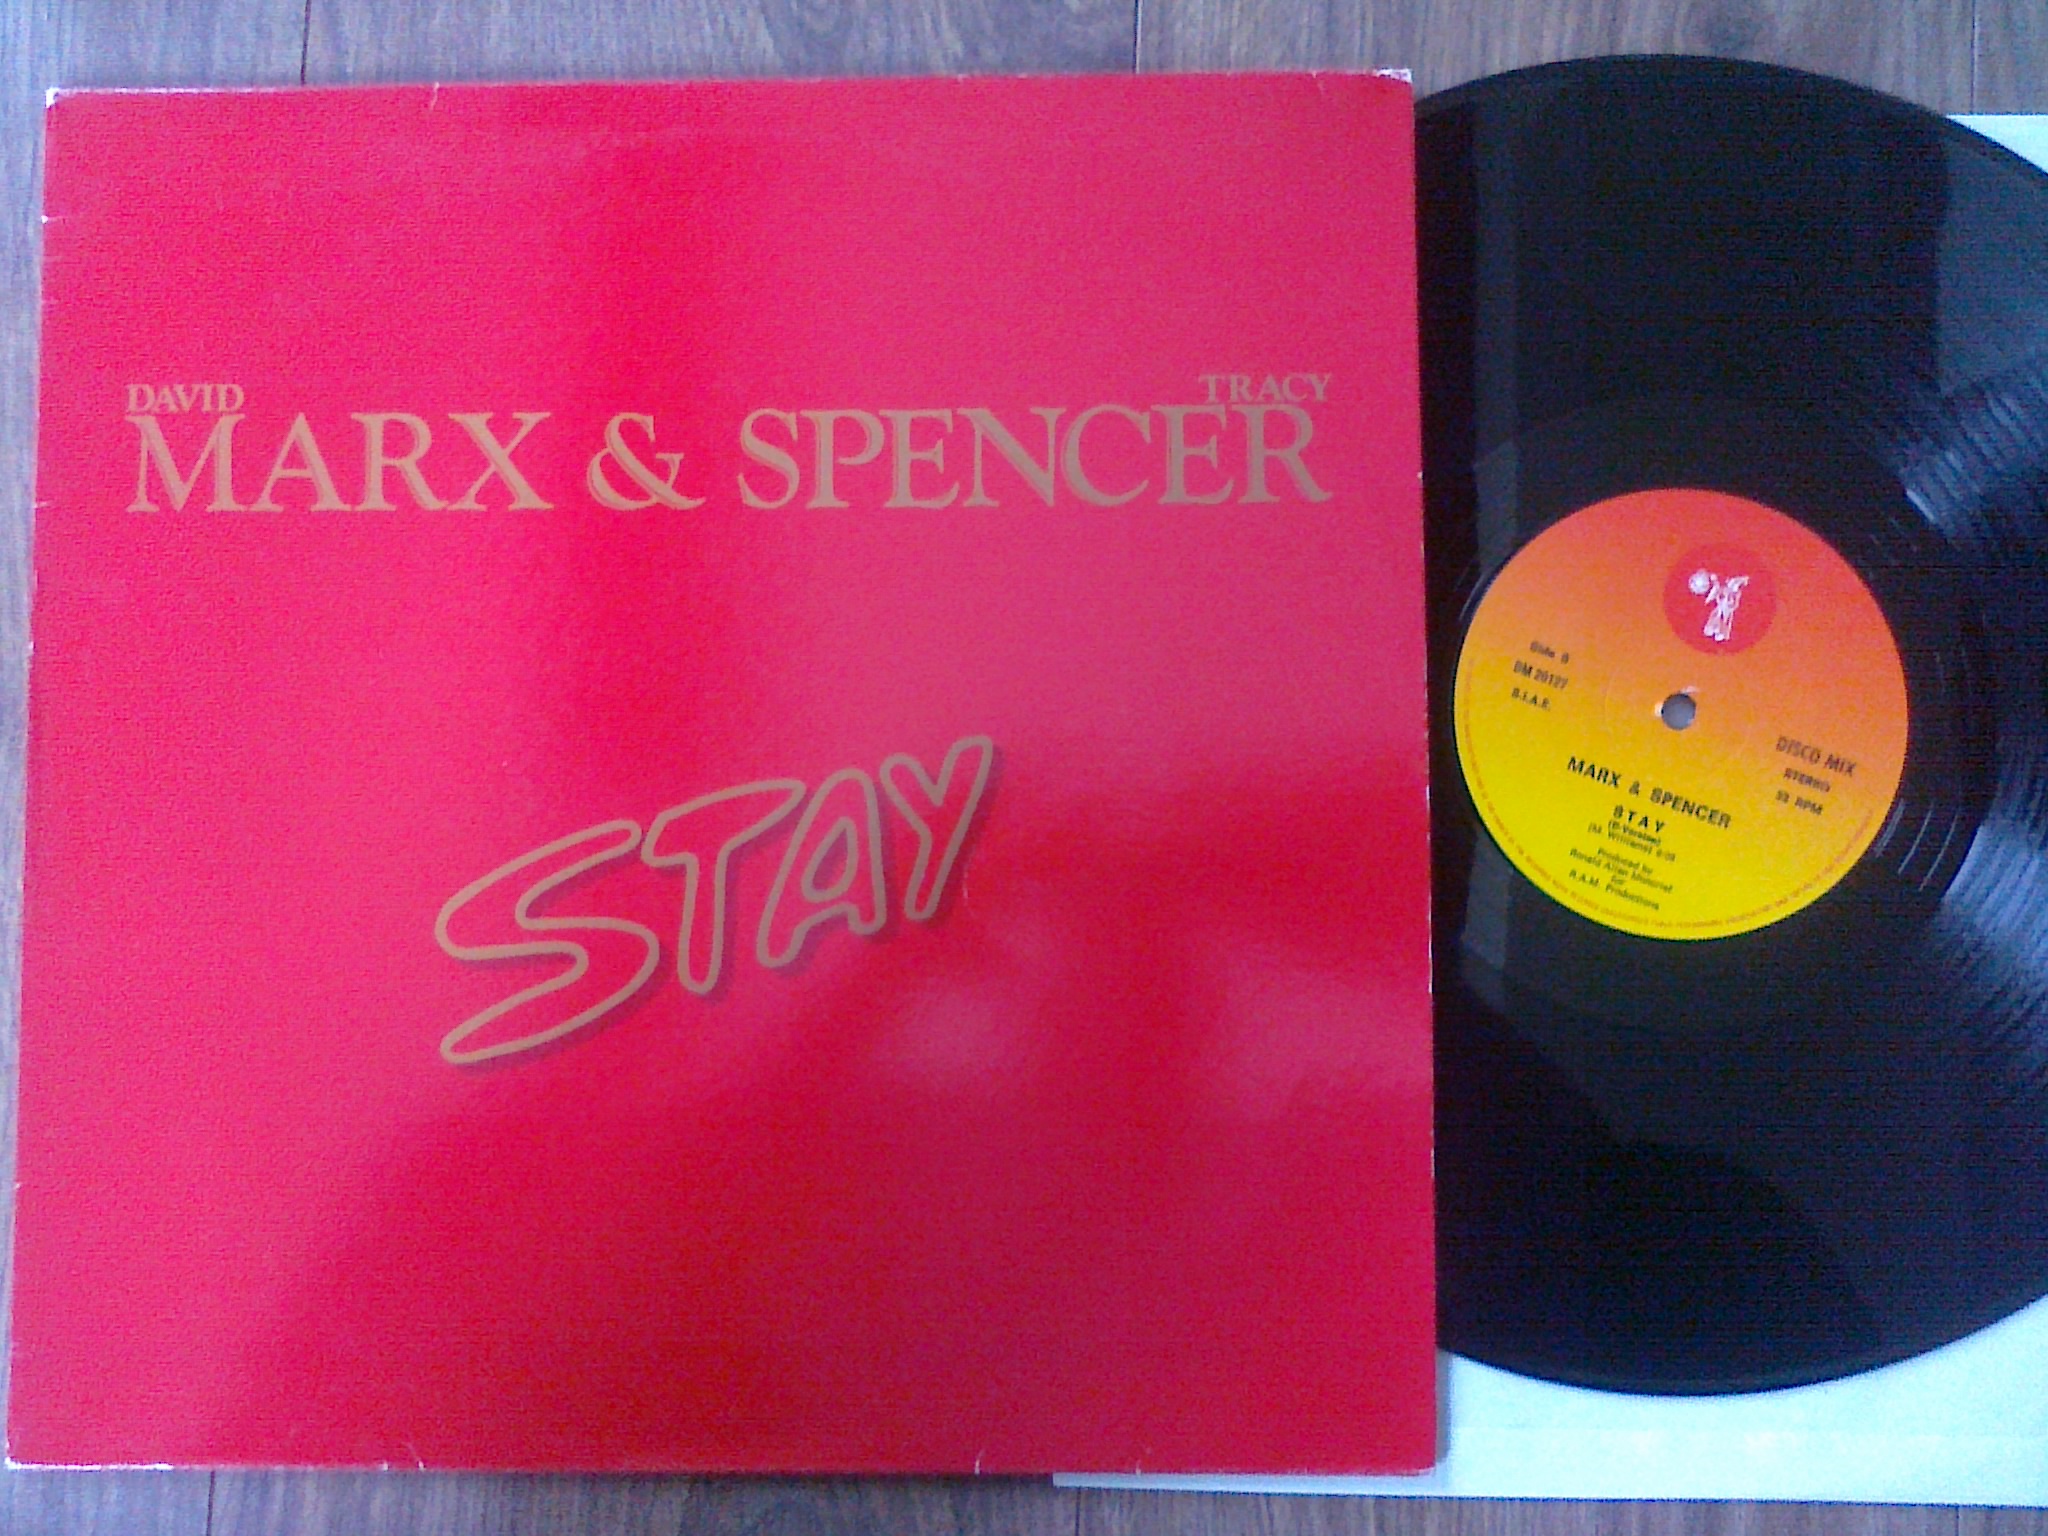 David Marx and Tracy Spencer - Stay